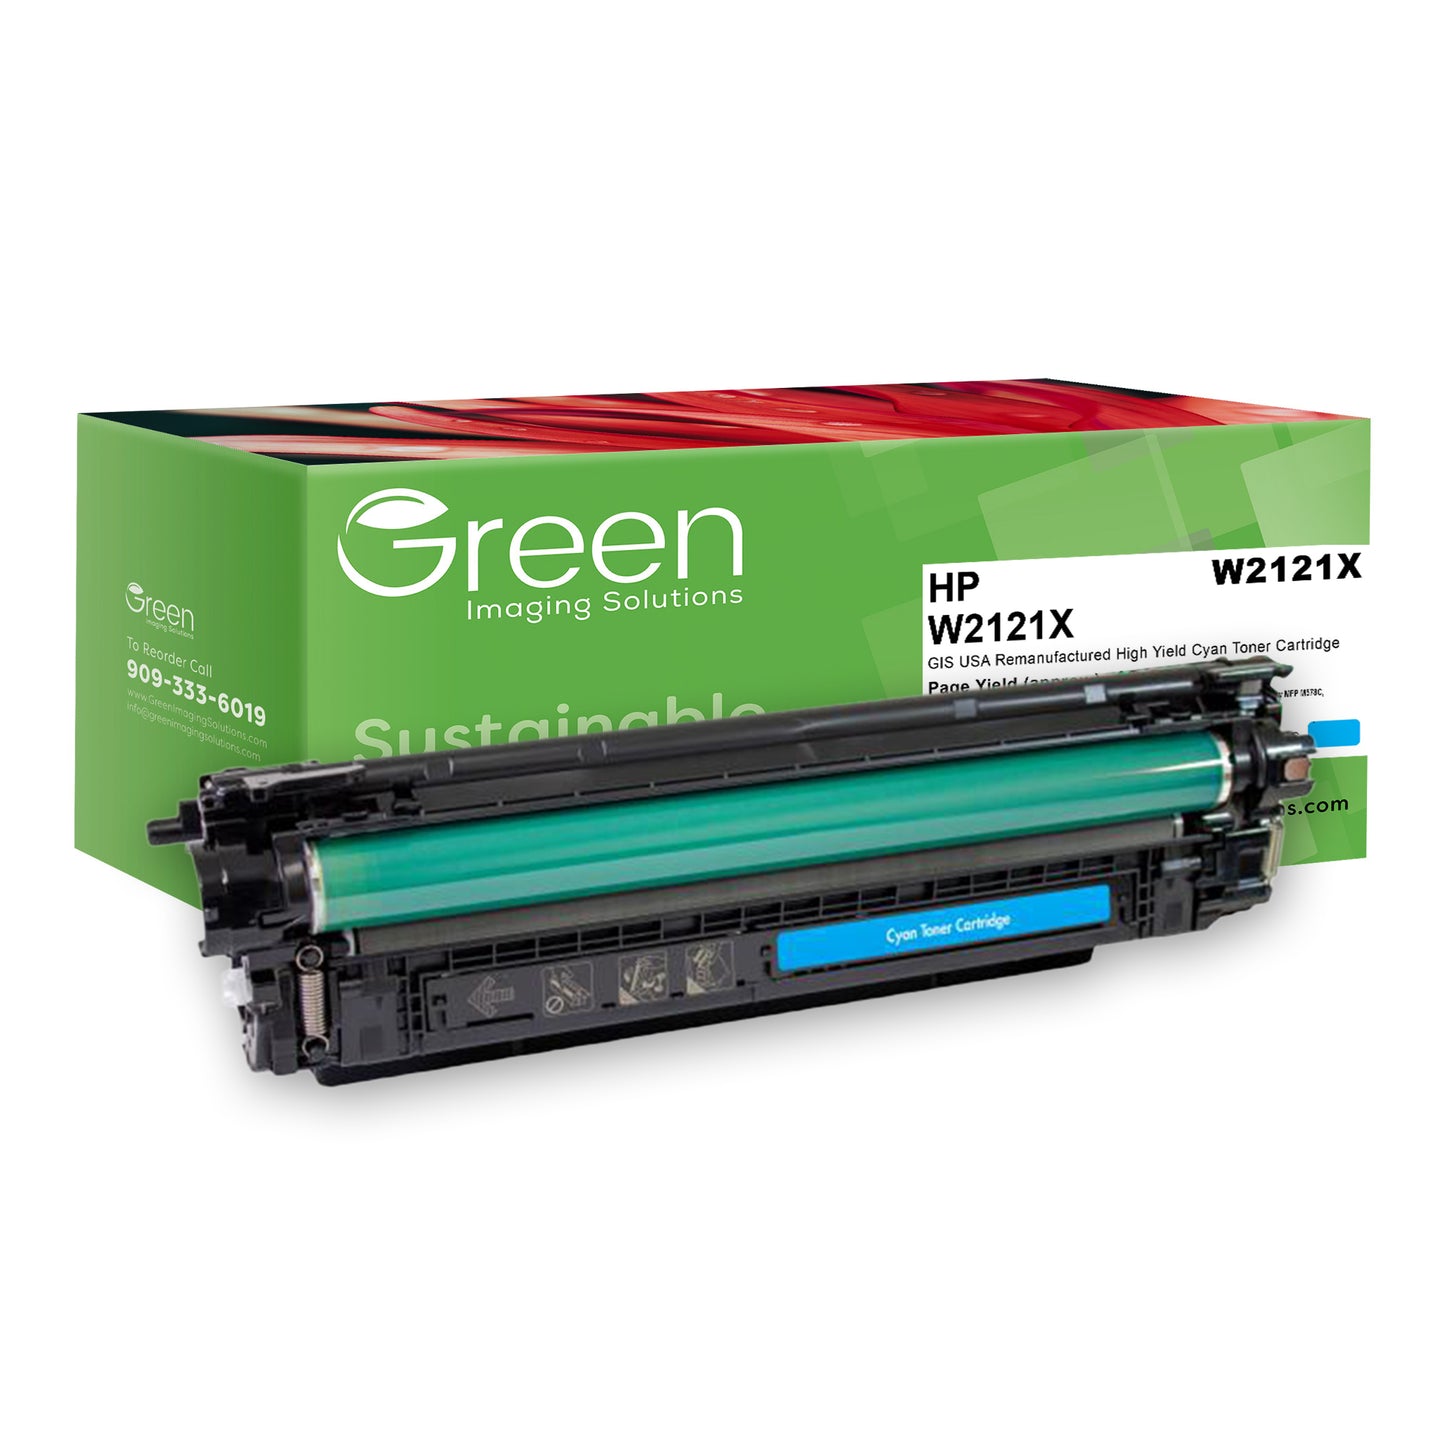 Green Imaging Solutions USA Remanufactured High Yield Cyan Toner Cartridge (Reused OEM Chip) for HP 212X (W2121X)